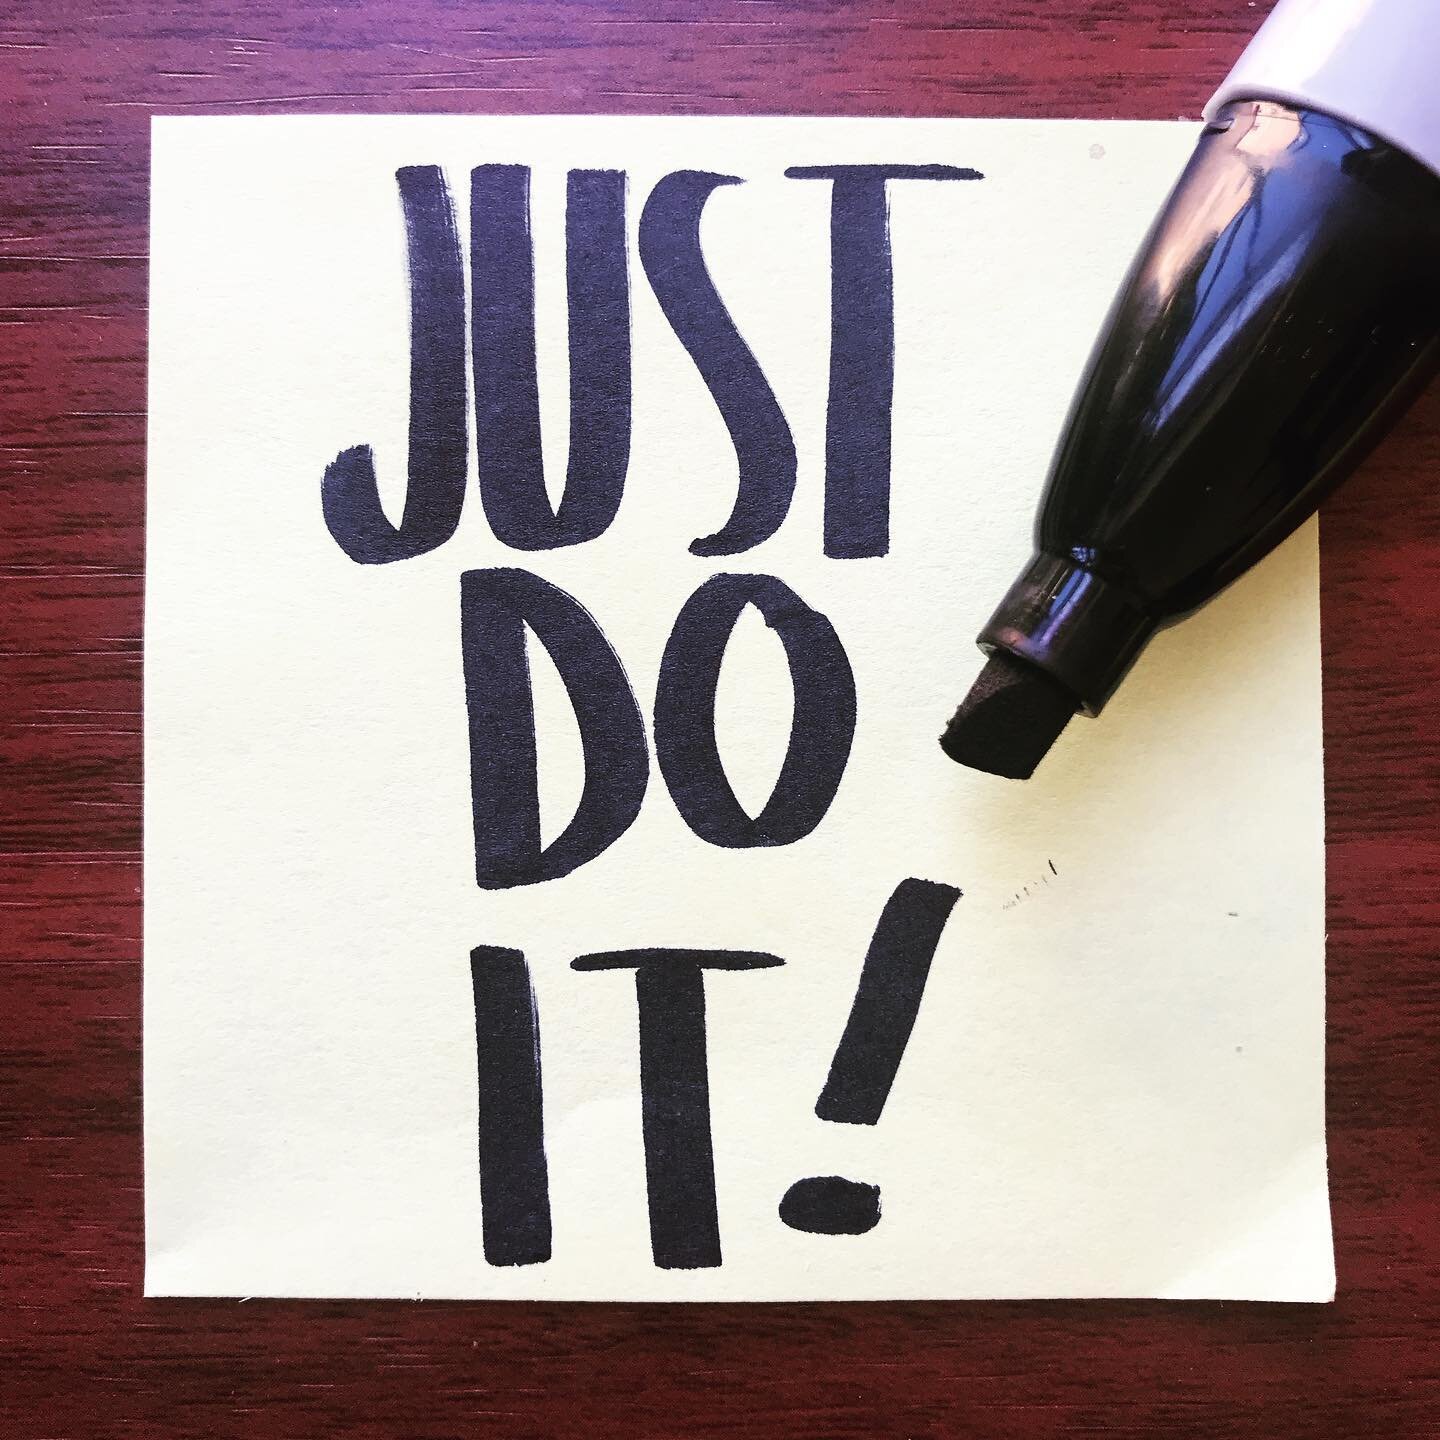 Just do it. Sometimes it&rsquo;s better to just do it than to overthink it. Less thinking. More doing. It&rsquo;s in the doing where you&rsquo;ll learn and grow from. Especially in art, if it&rsquo;s visual, it&rsquo;s a right-brain process. Not a le